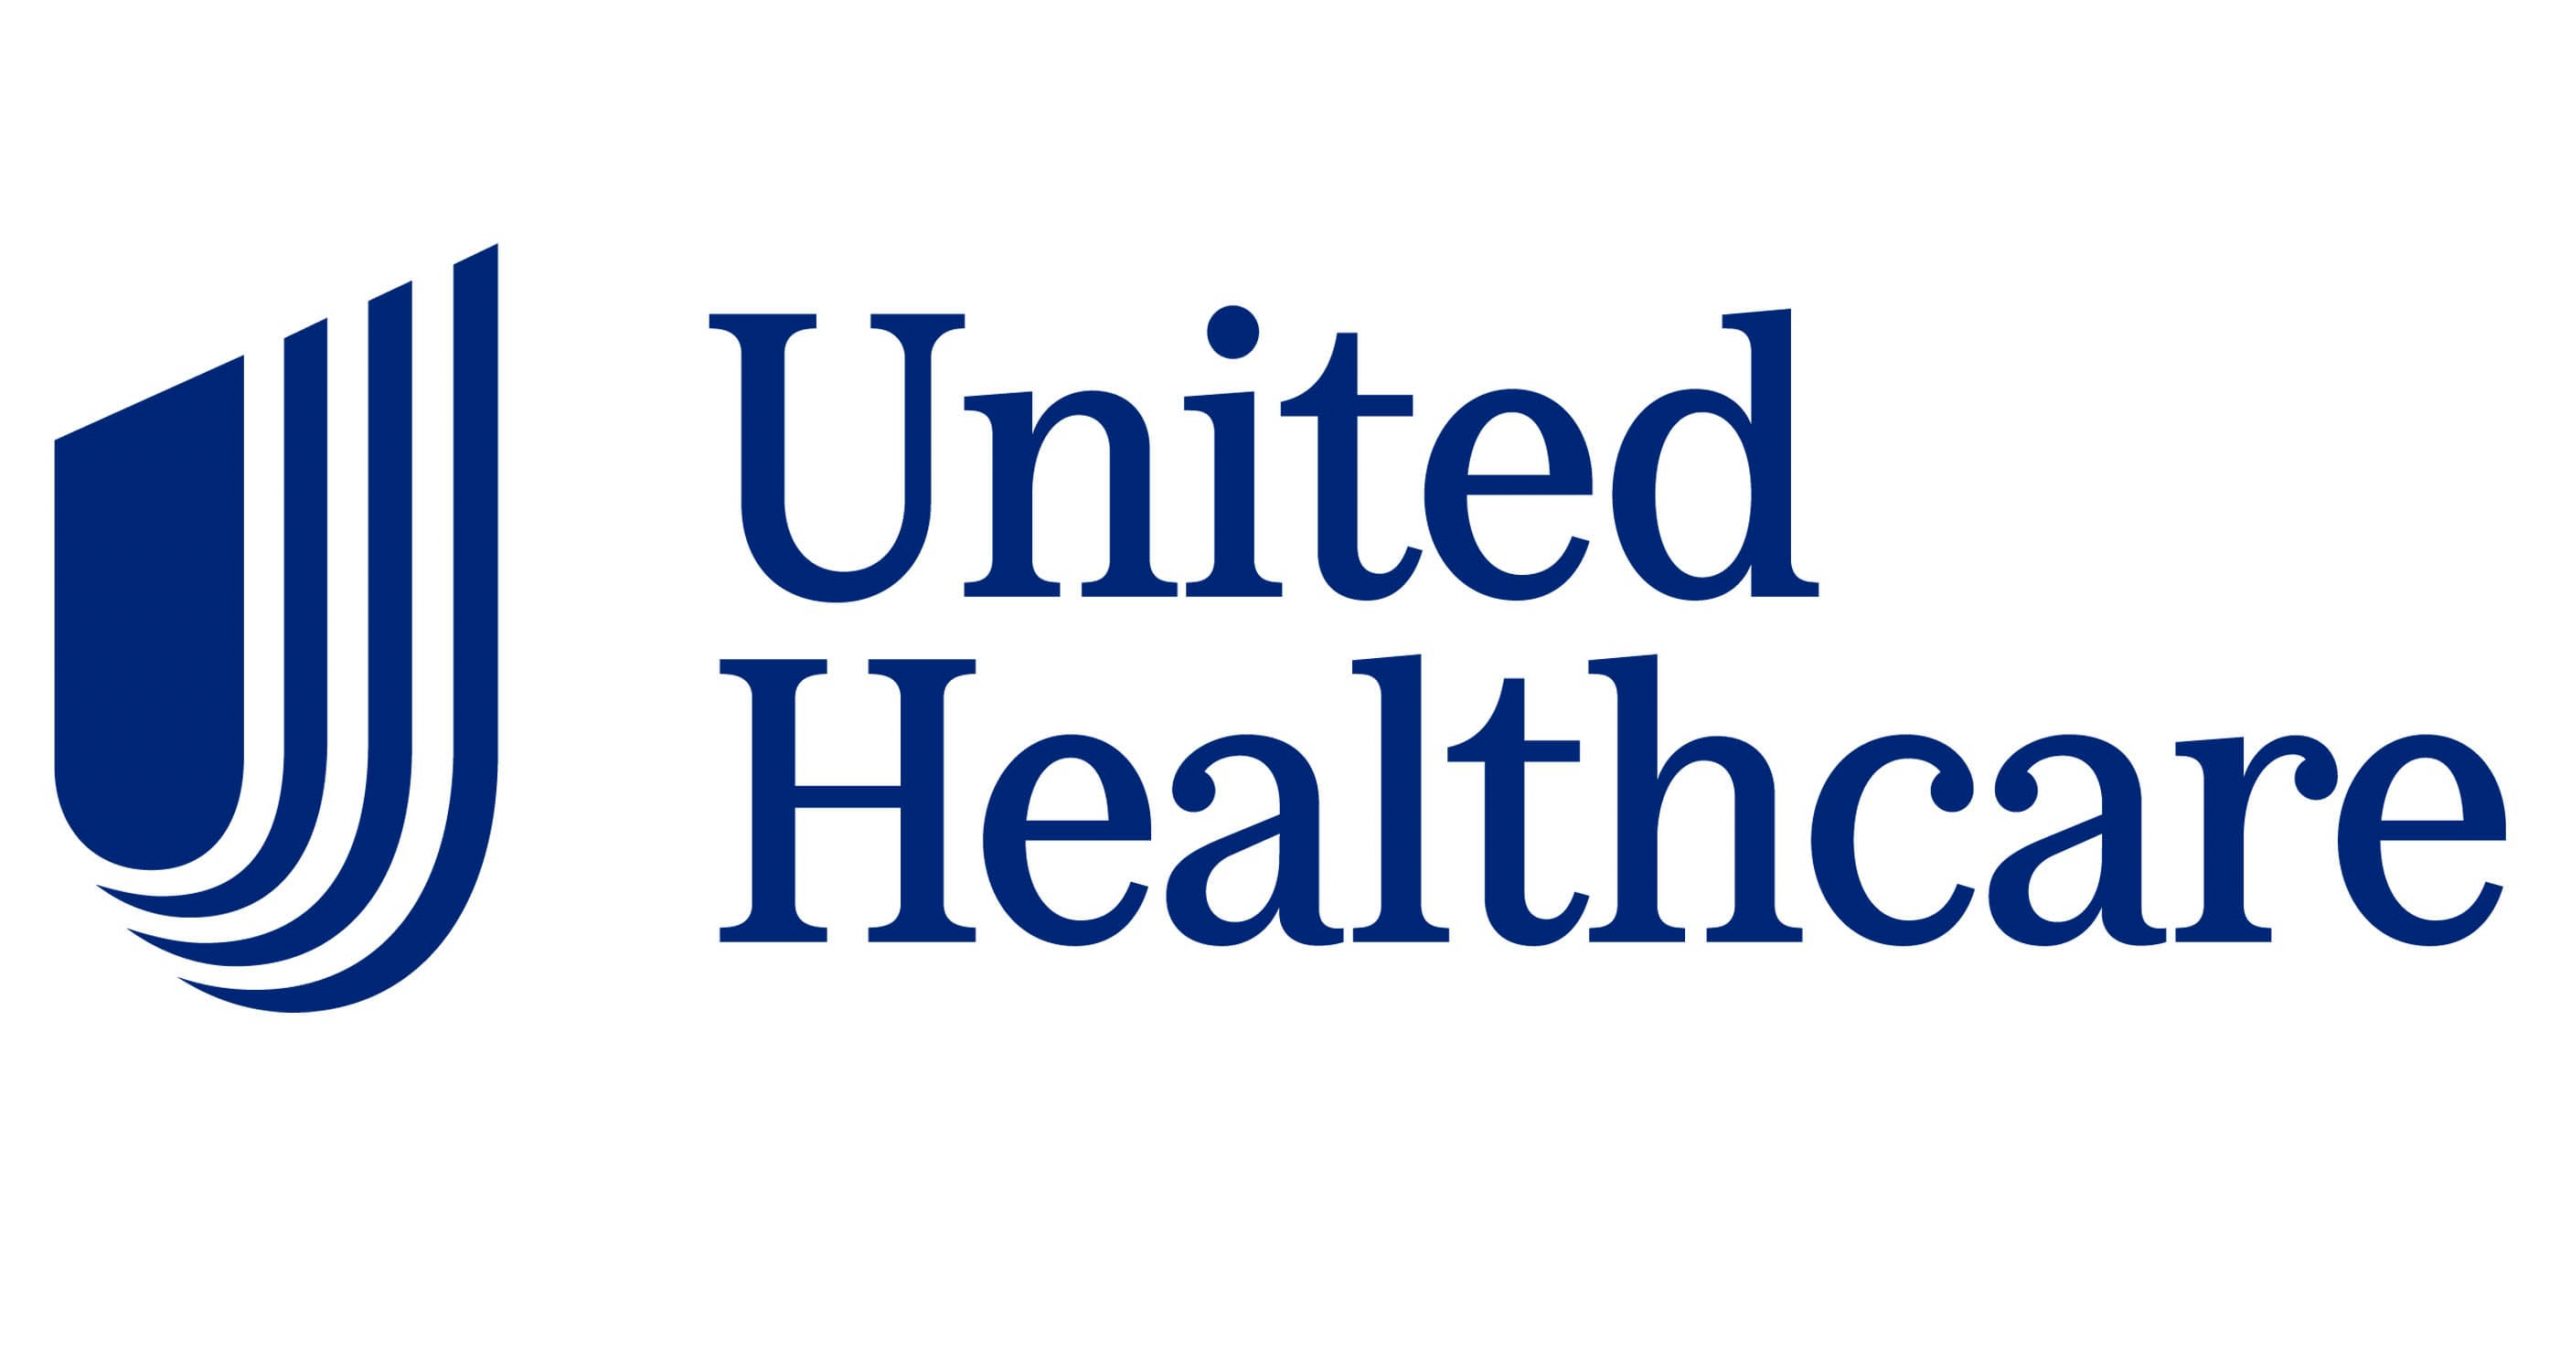 United healthcare action